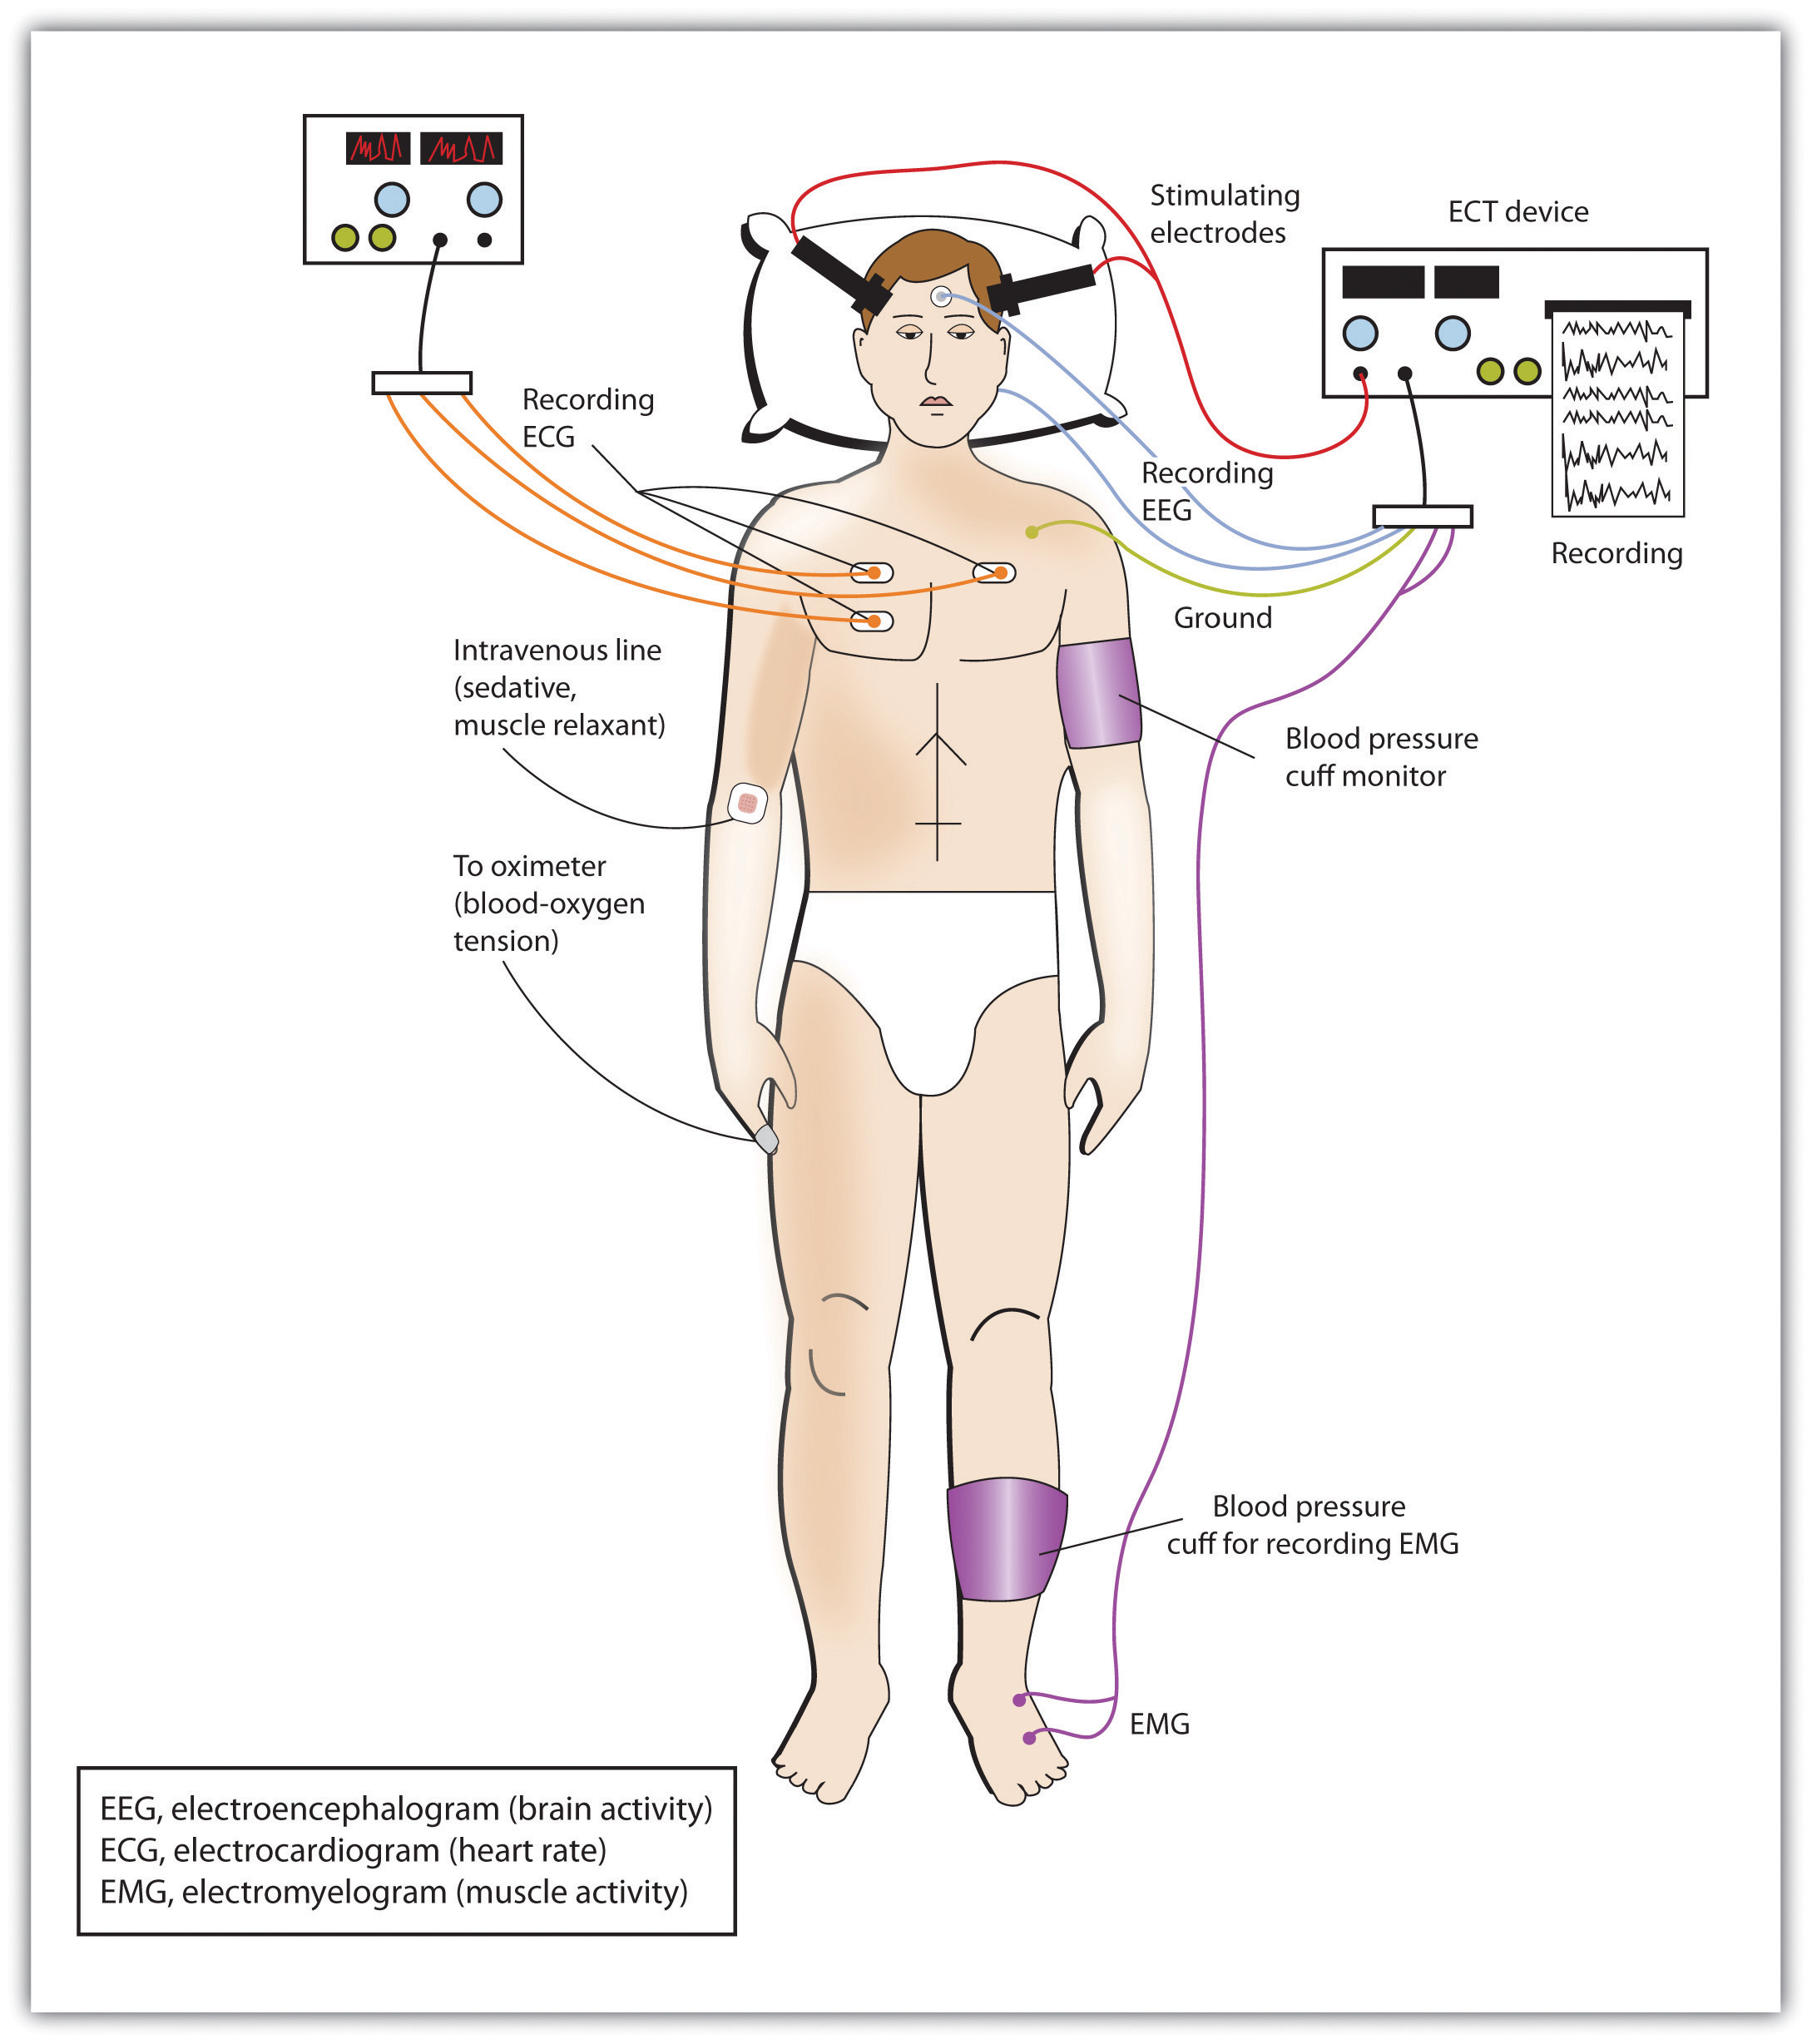 This diagram illustrates a man receiving electroconvulsive therapy (ECT) in which various wires and electrodes are shown to be hooked up to his body and nearby machines.